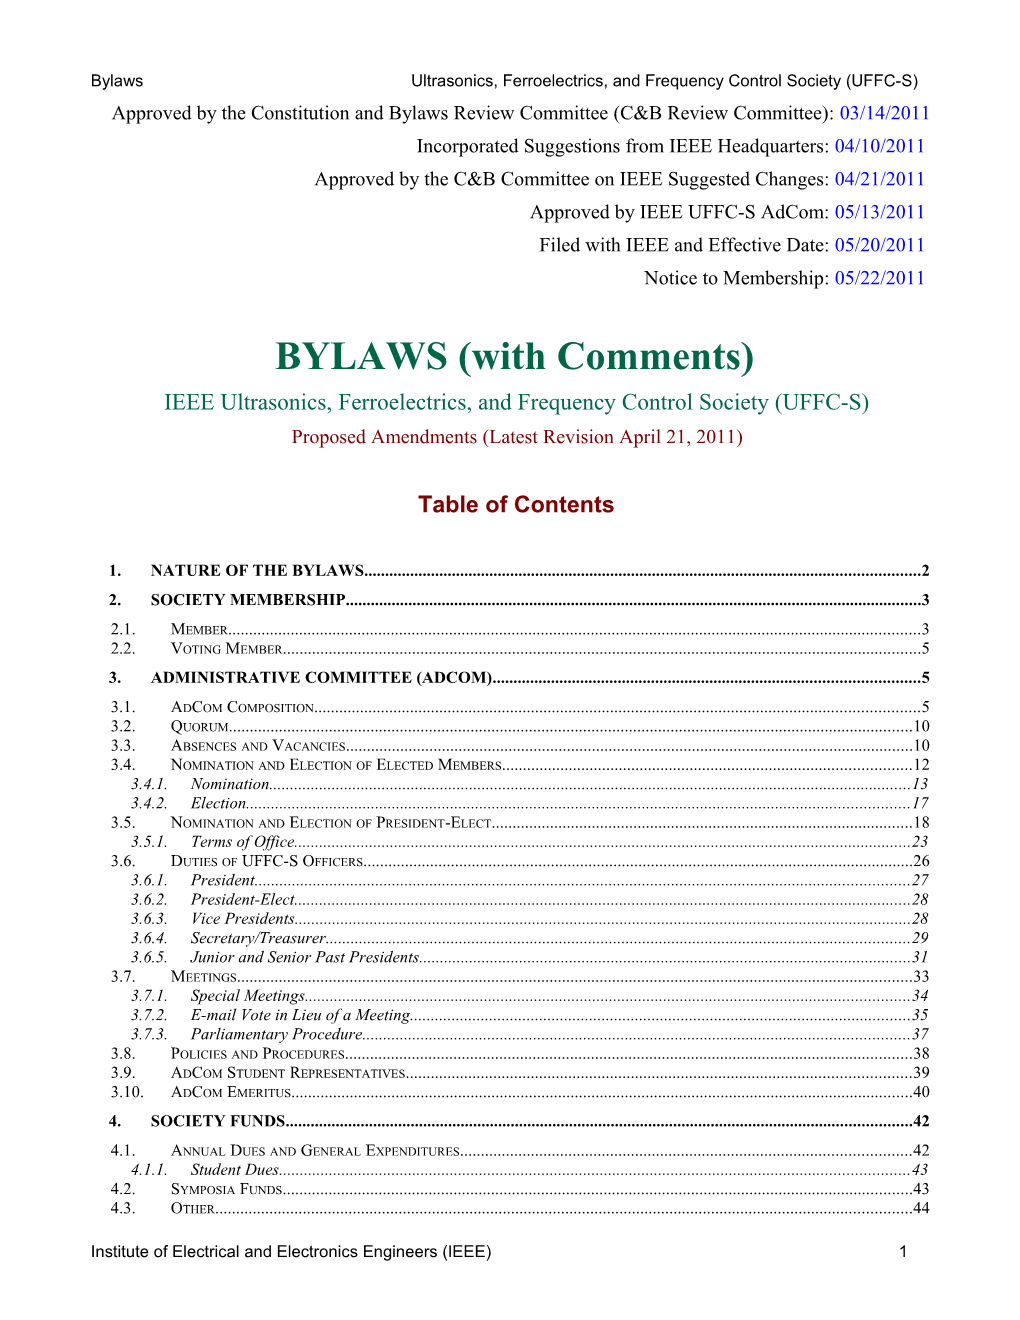 UFFC-S Bylaws - with Comments